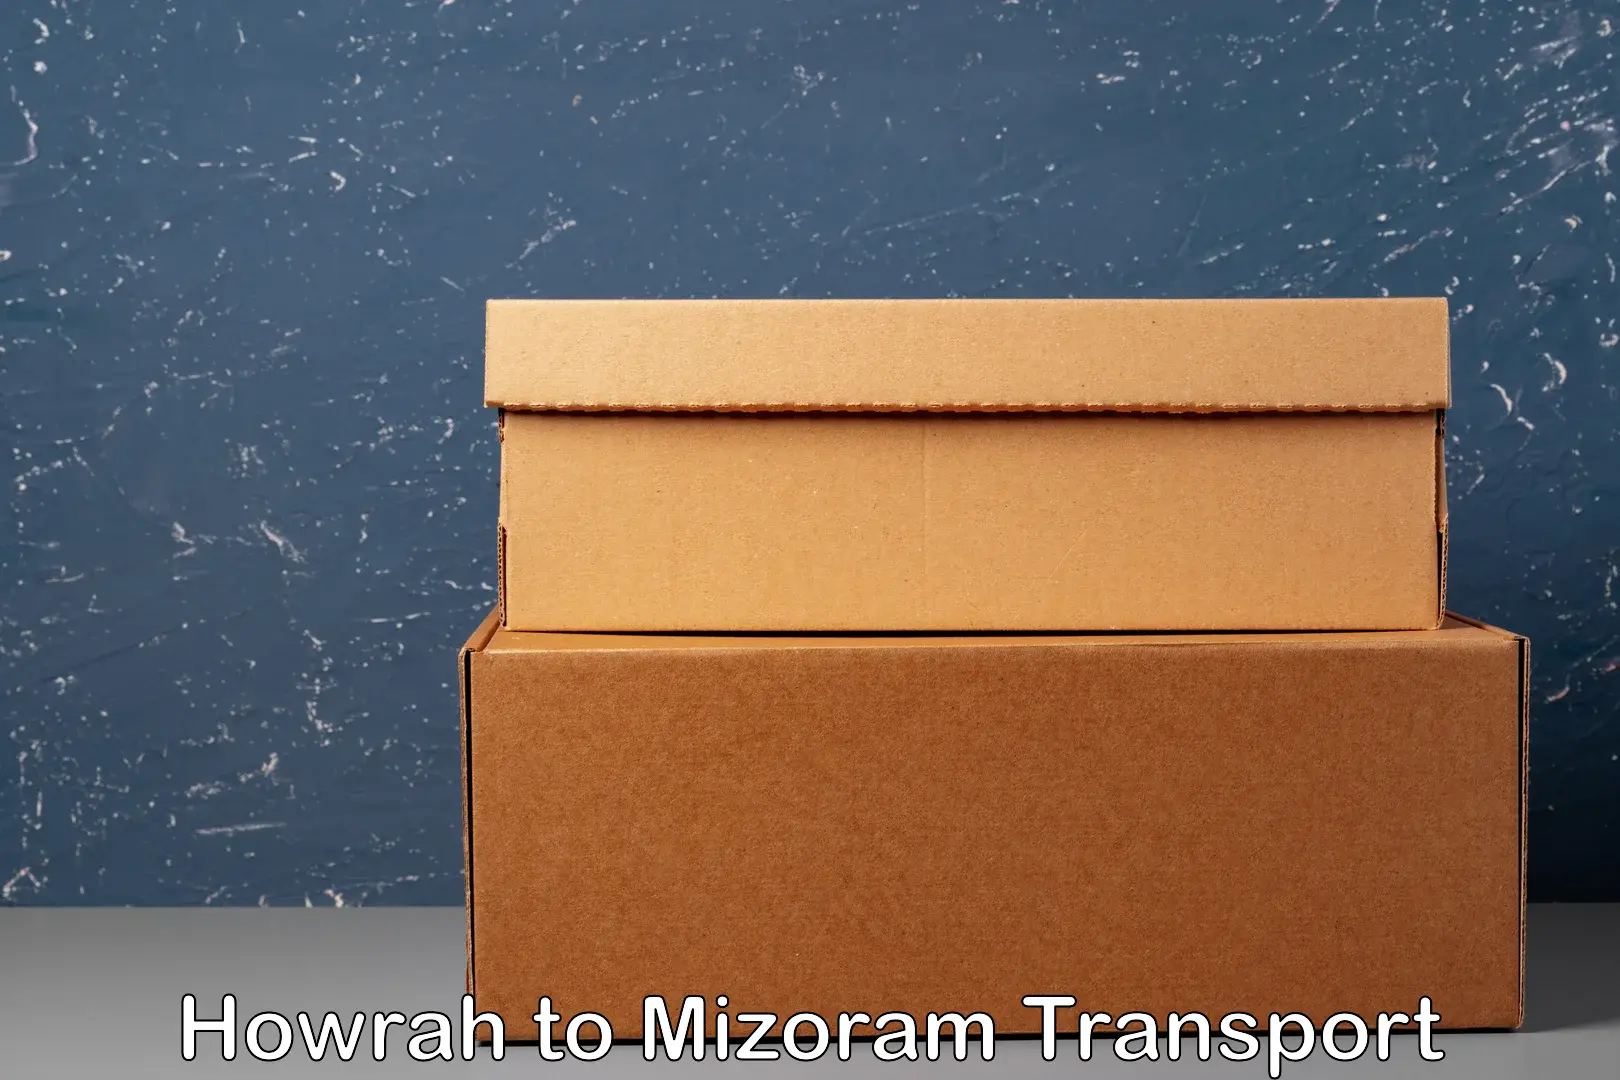 Transport shared services Howrah to Mizoram